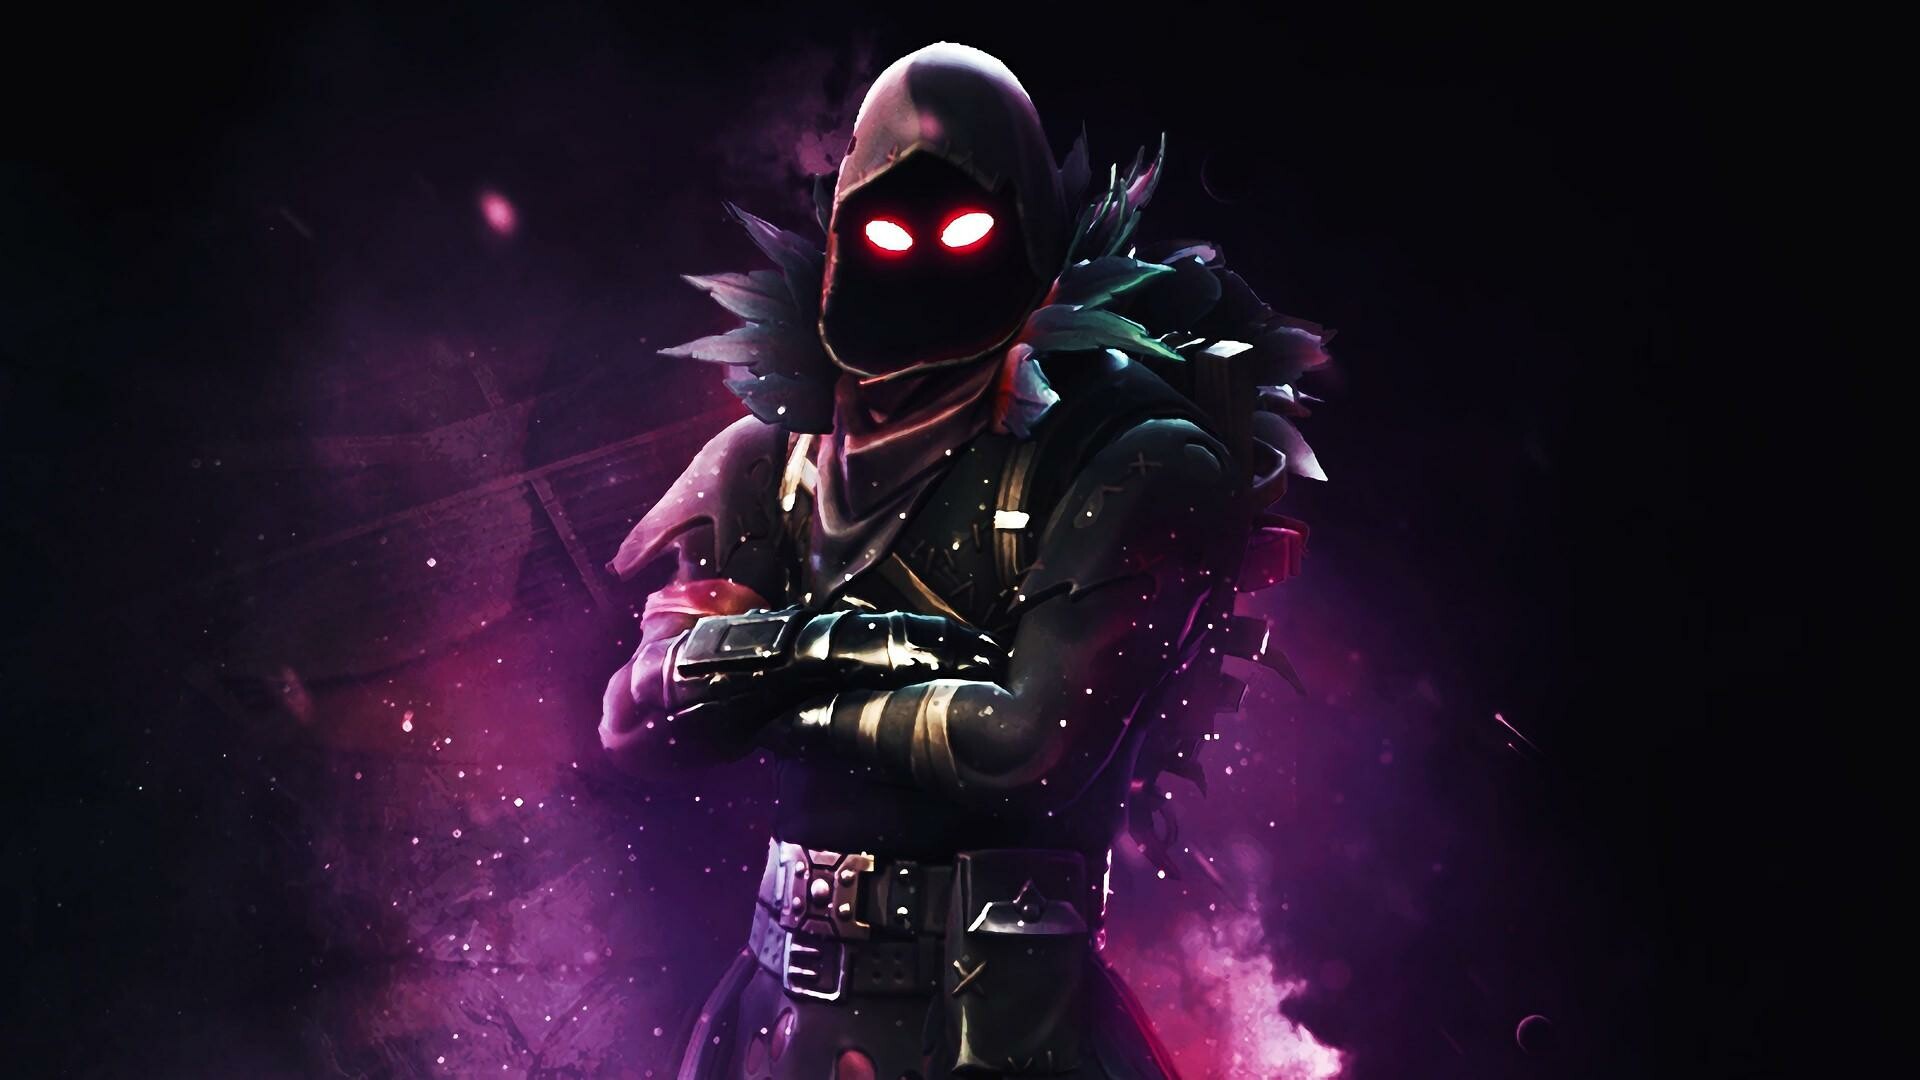 Fortnite: Rave, A Legendary Outfit, The Iron Cage Back Bling is bundled with this Outfit. 1920x1080 Full HD Background.